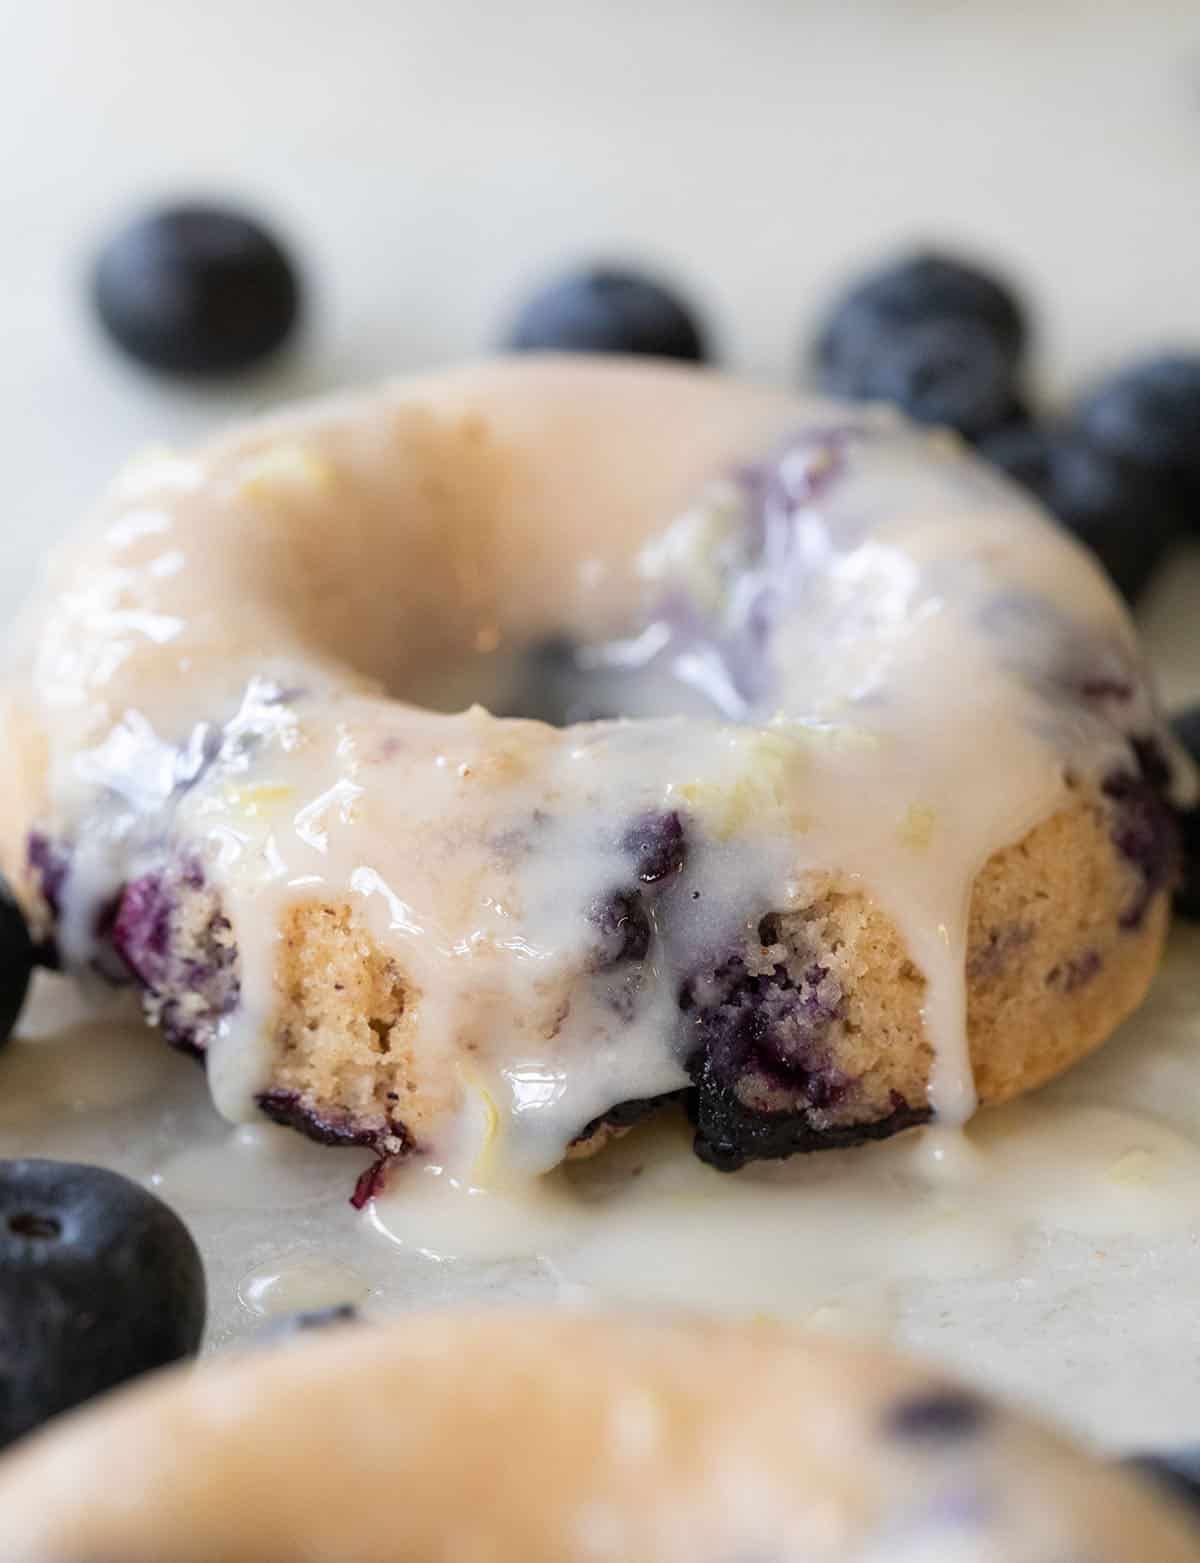 Glazed blueberry donut with juicy blueberries and dripping vanilla glaze.